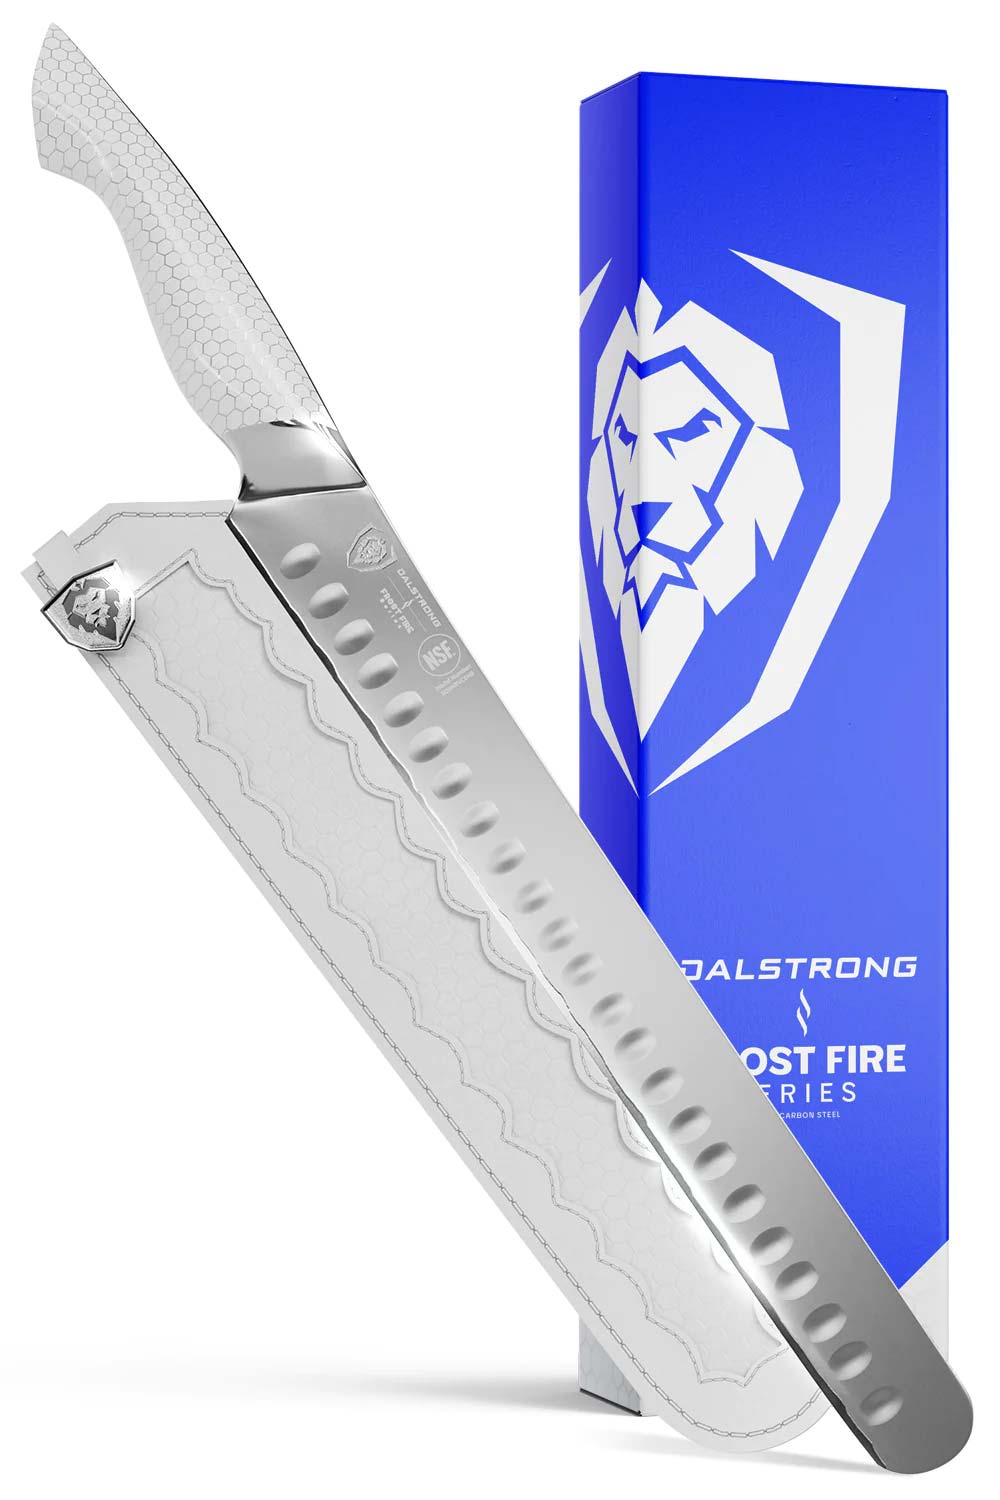 Dalstrong frost fire series 12 inch slicer knife with white honeycomb handle in front of it's premium packaging.